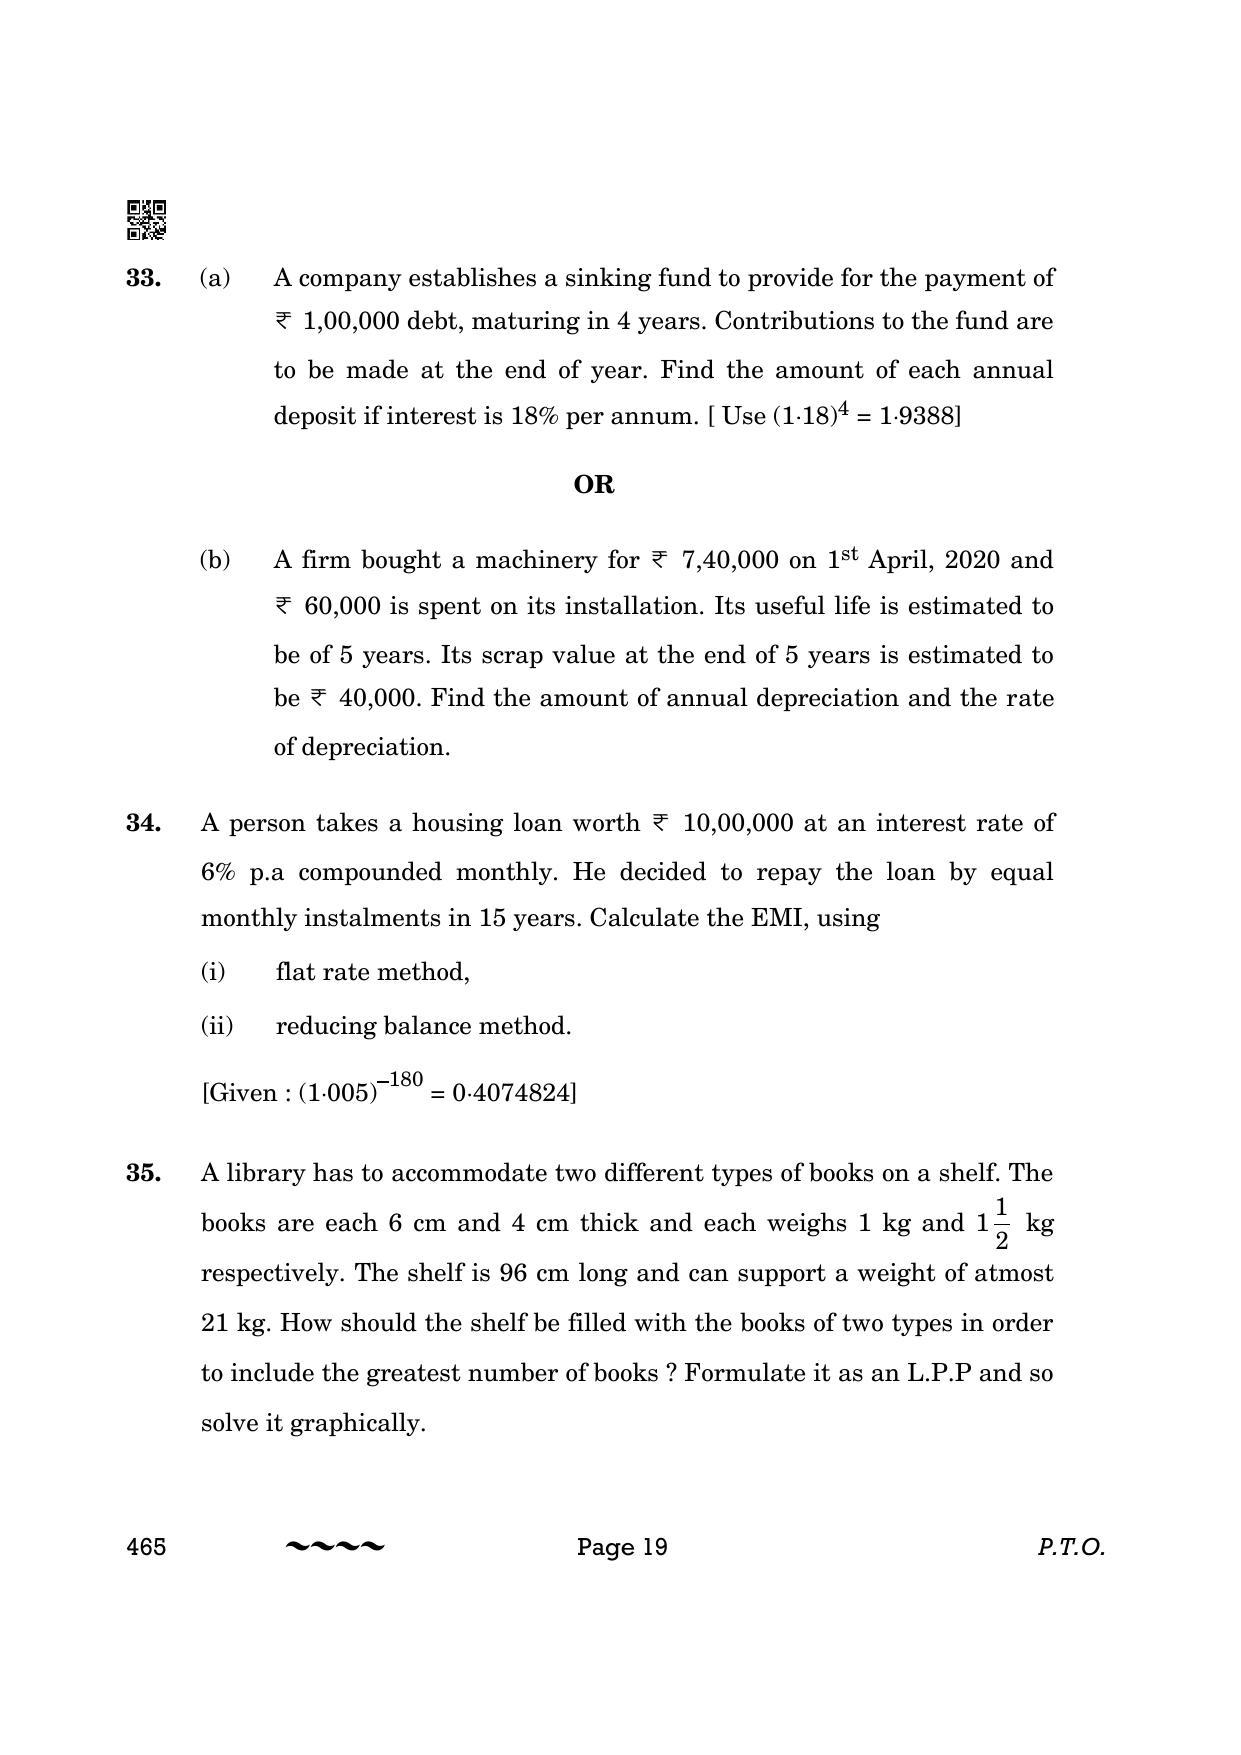 CBSE Class 12 465- Applied Mathematics 2023 (Compartment) Question Paper - Page 19